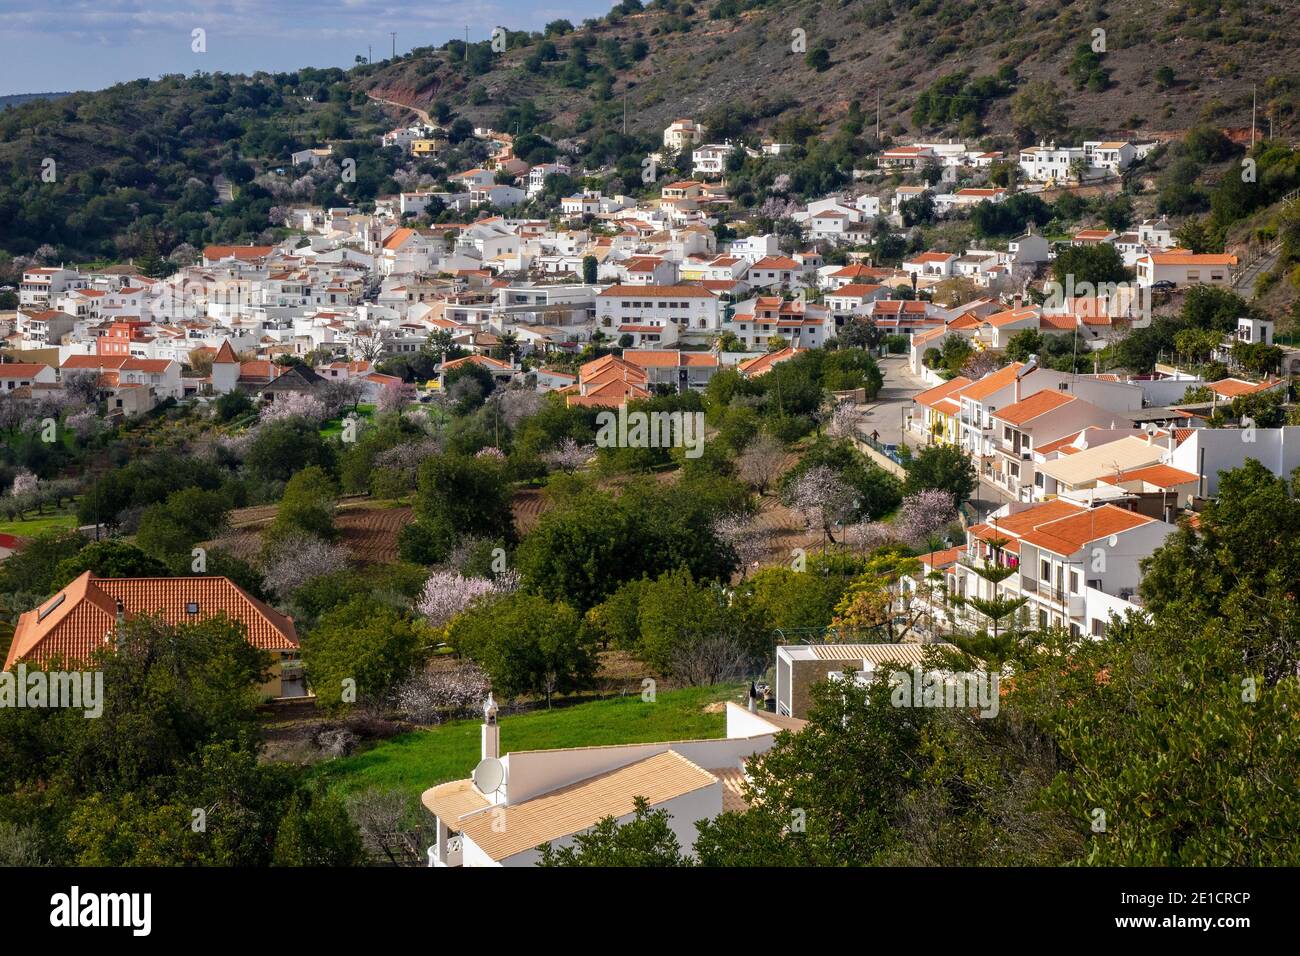 Aerial View Of The Portuguese Village Of Alte The Algarve Portugal, Alte Is Set On A Hill Inland From The Popular Algarve Beaches Stock Photo